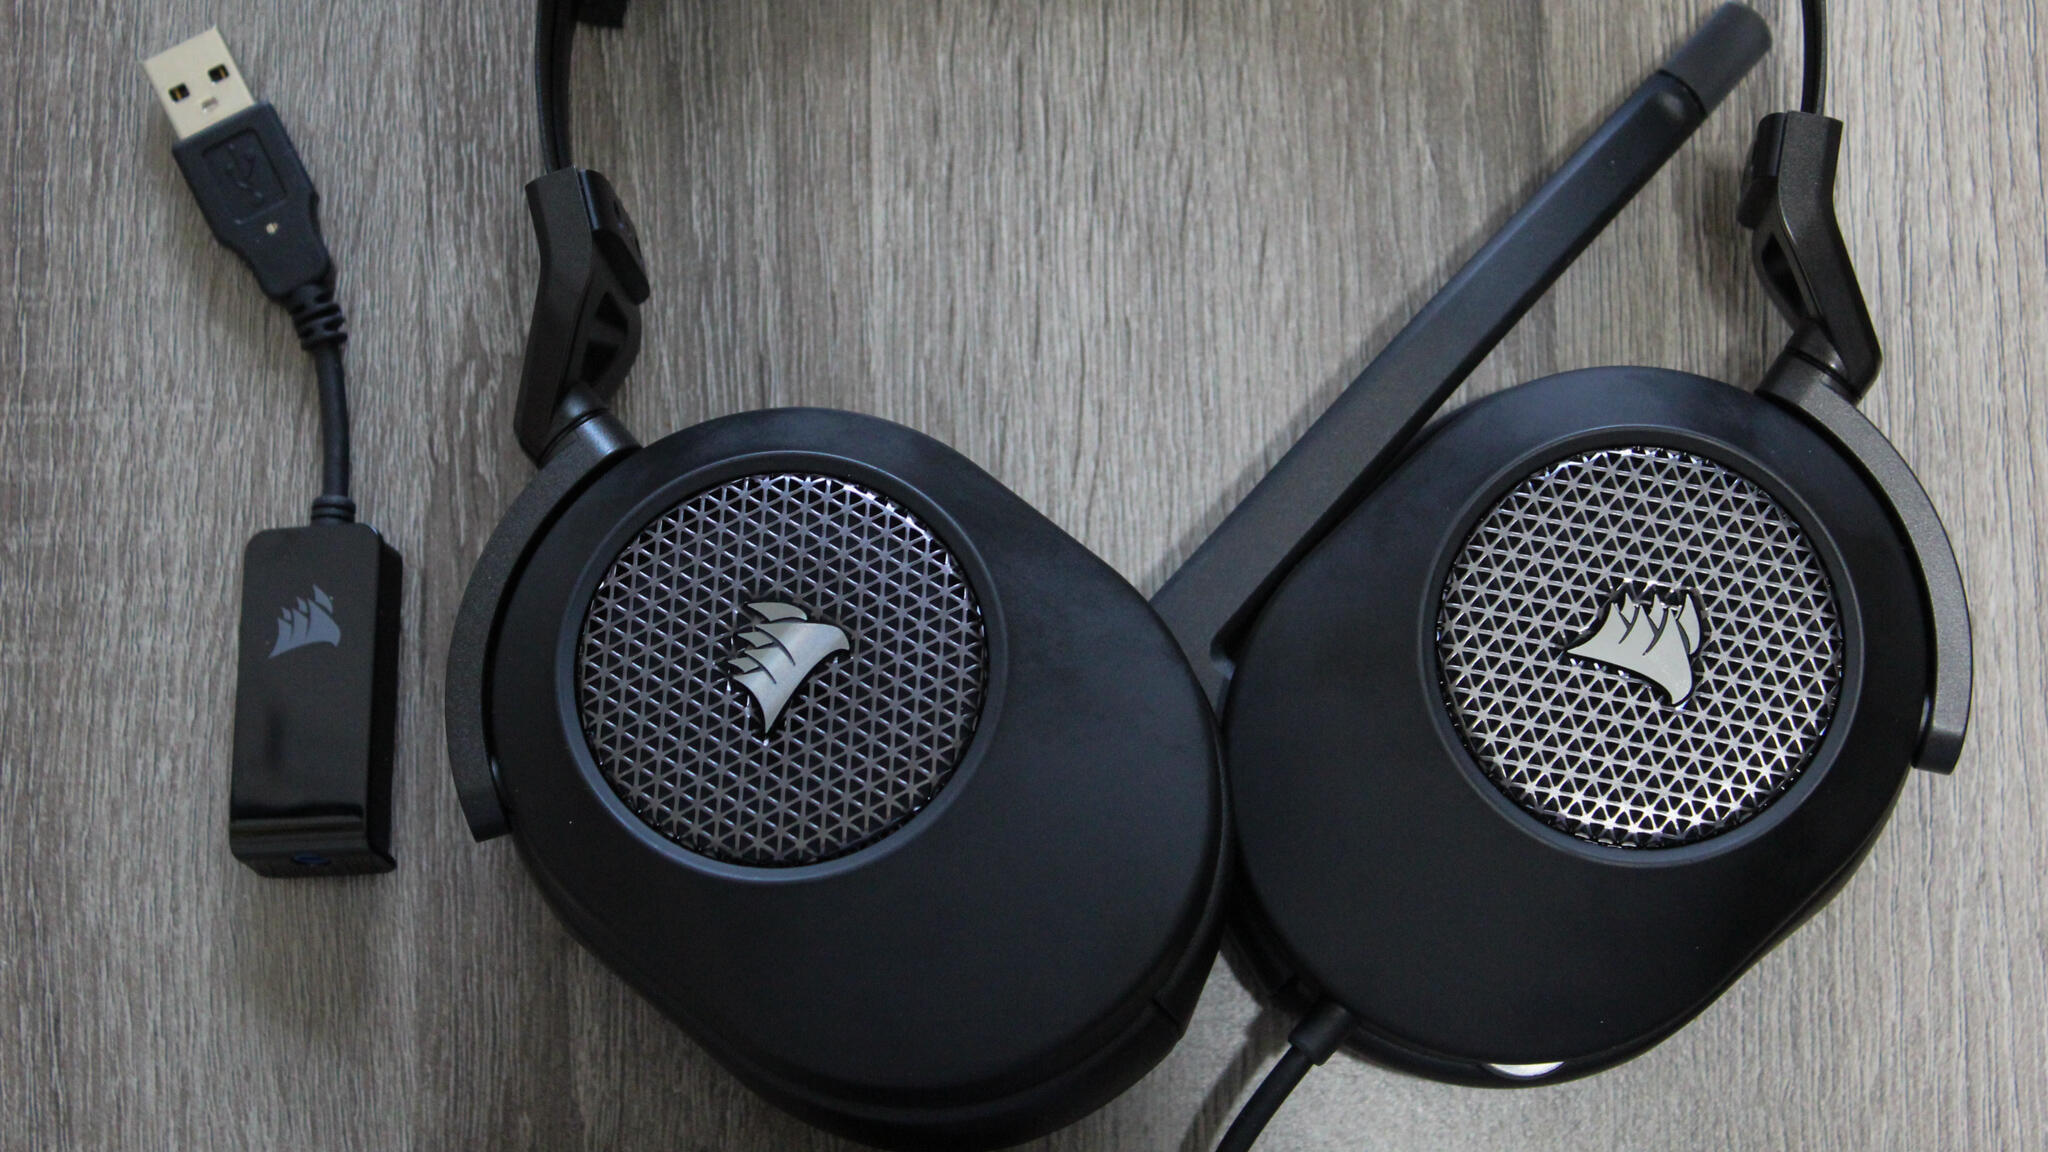 Corsair HS65 Surround review – a fantastic gaming headset under $100